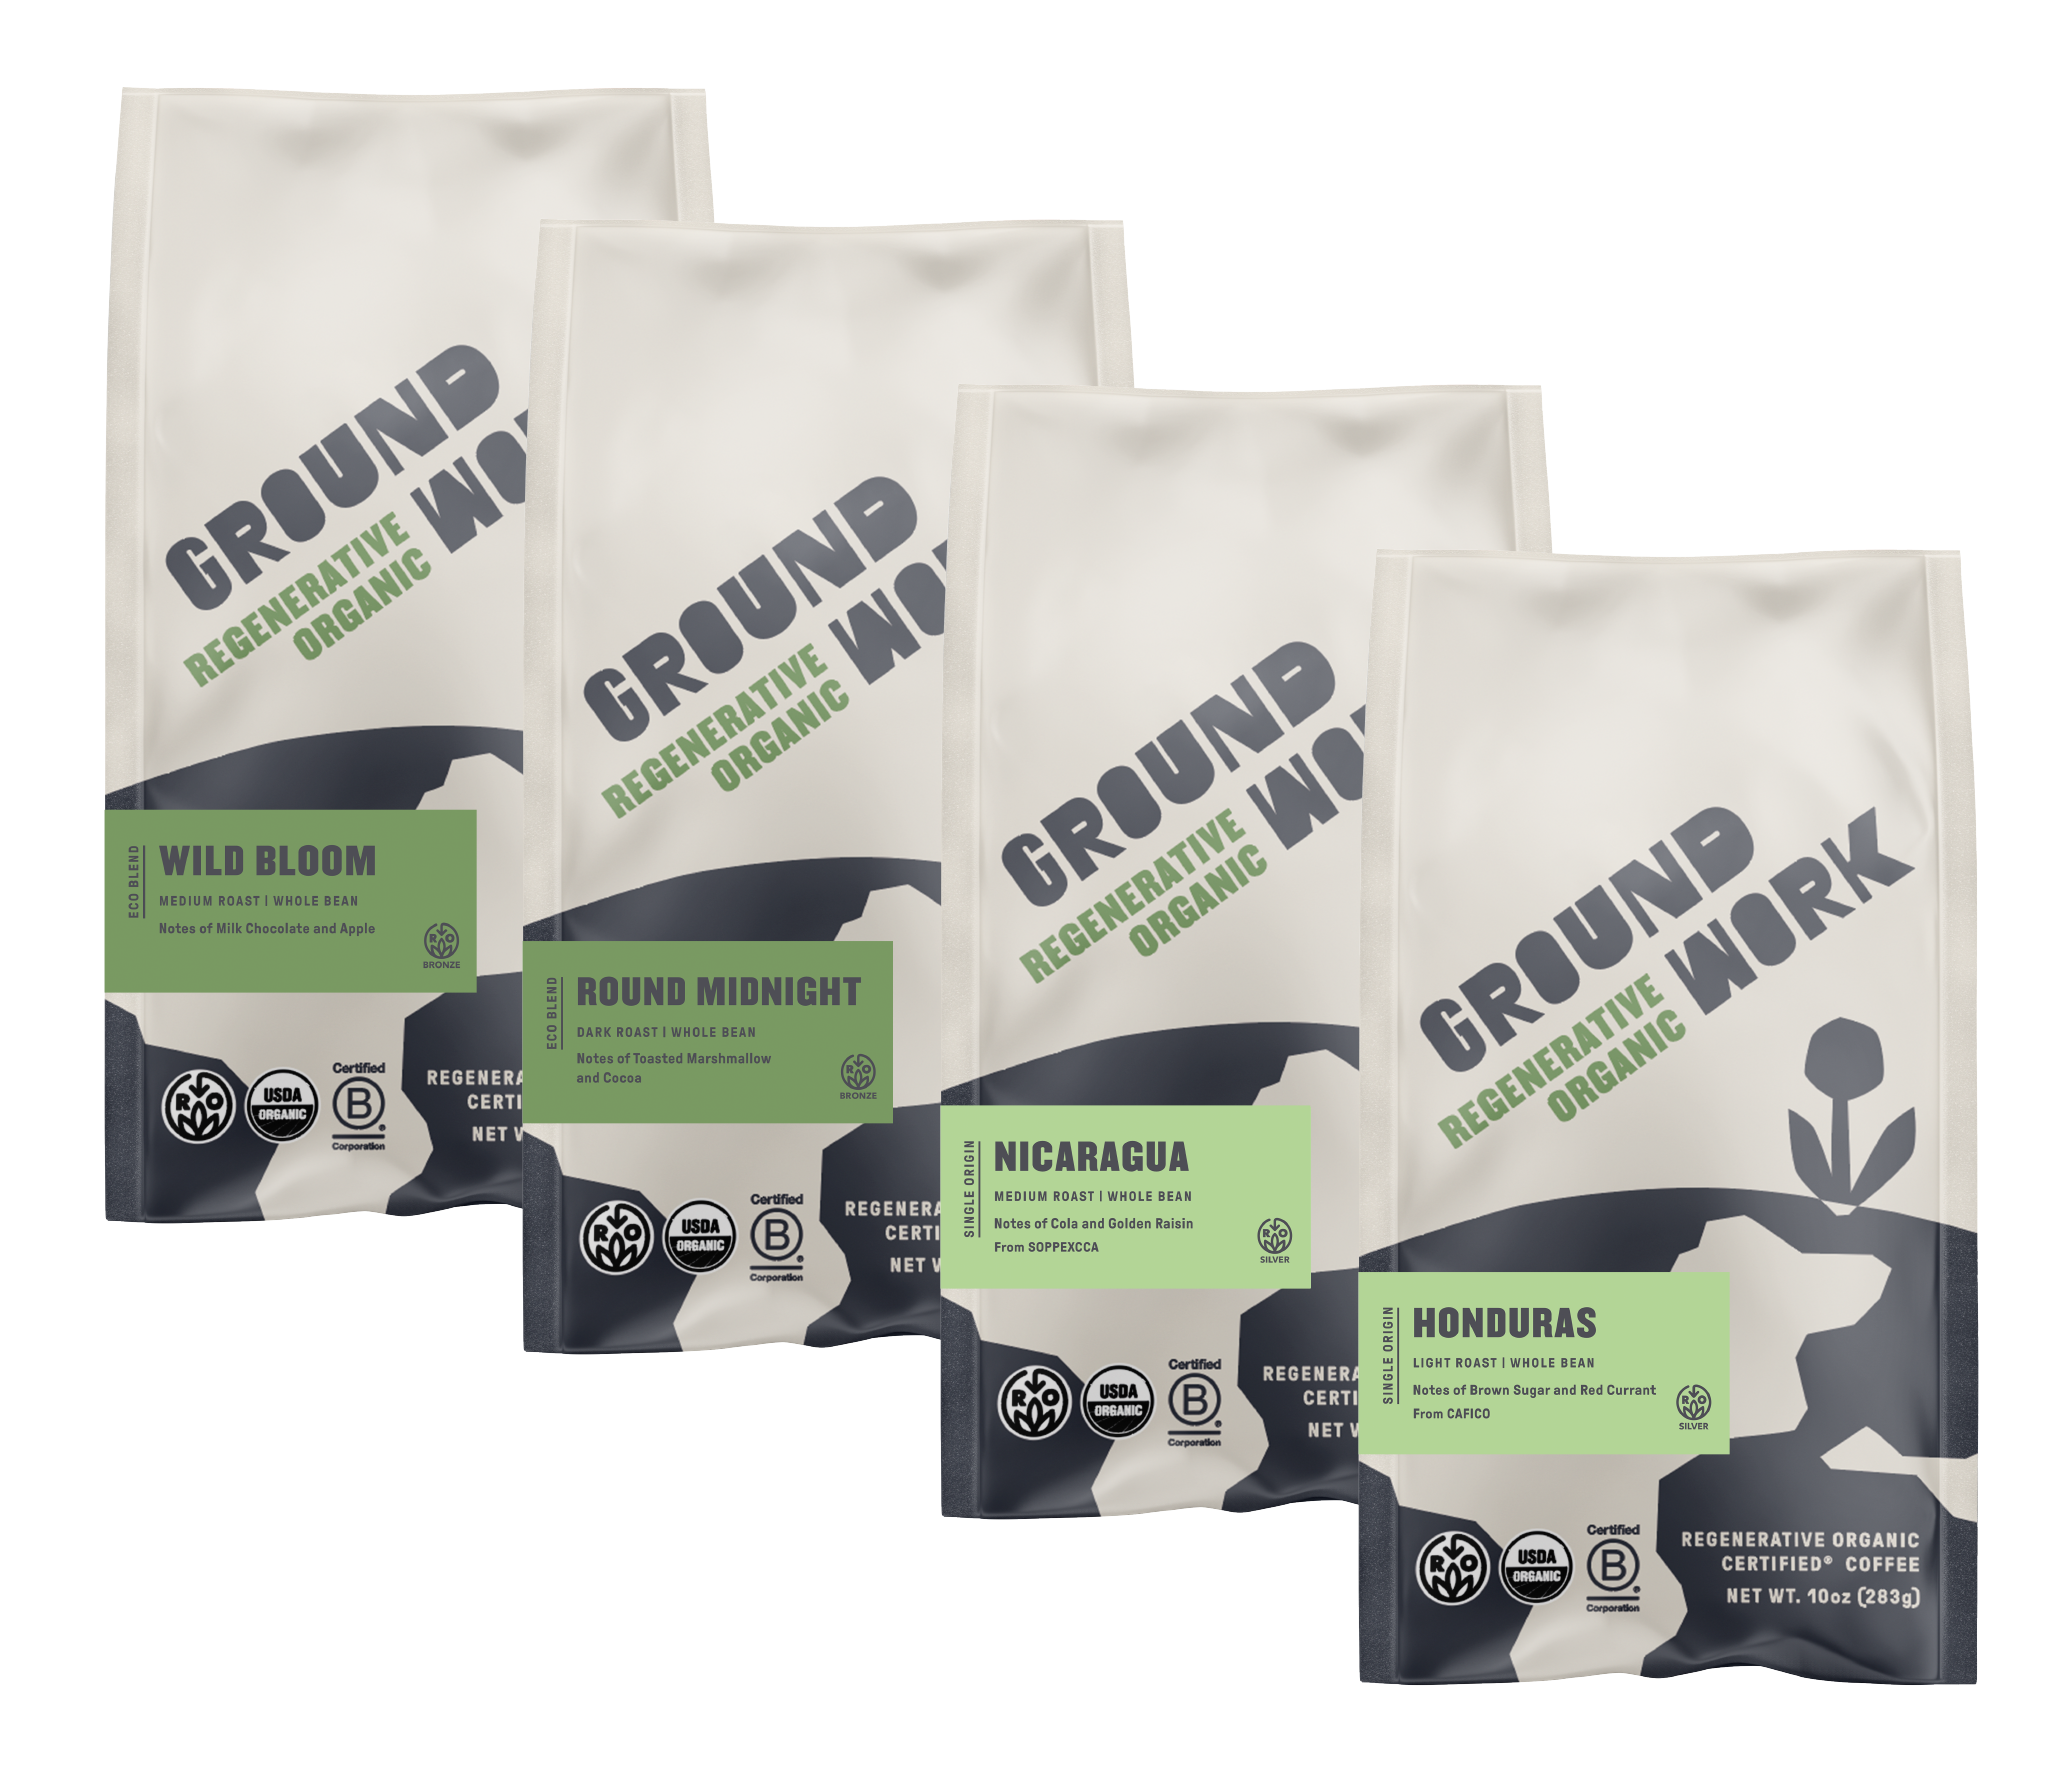 Four coffee bags, one of each of Groundwork's new Regenerative Organic offerings